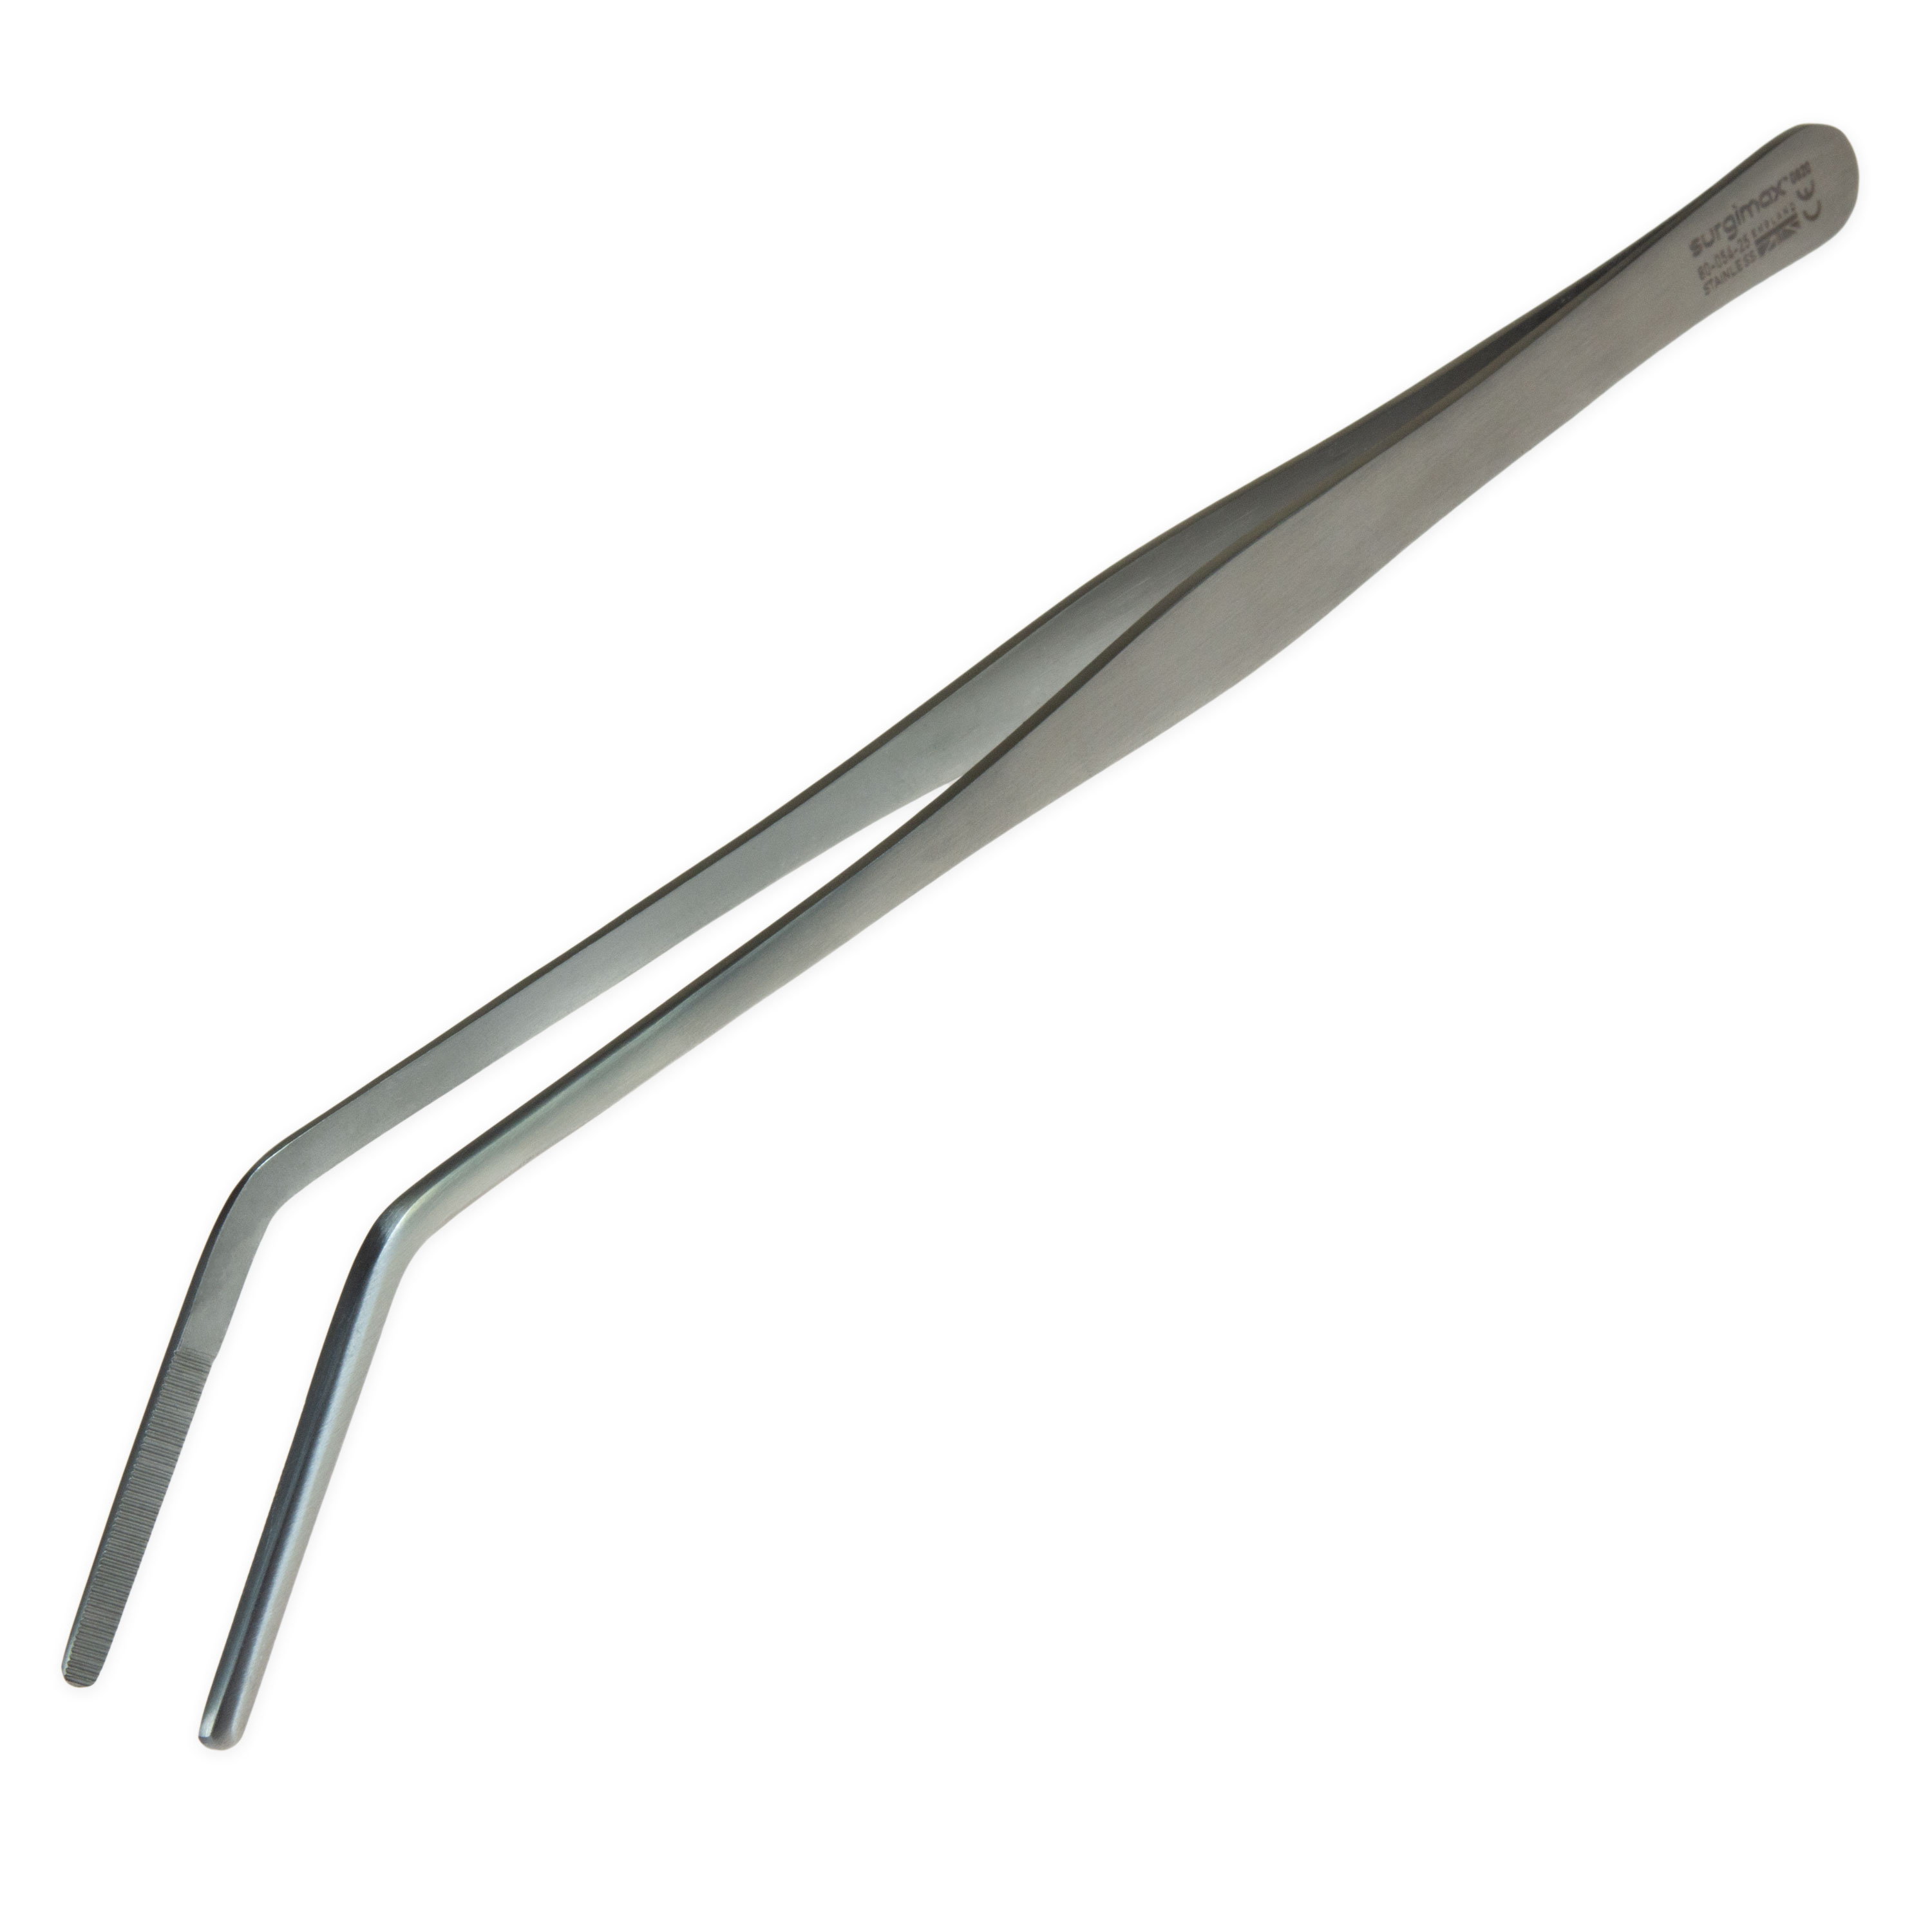 Tweezers 25 cm, slim with curved sides, angled